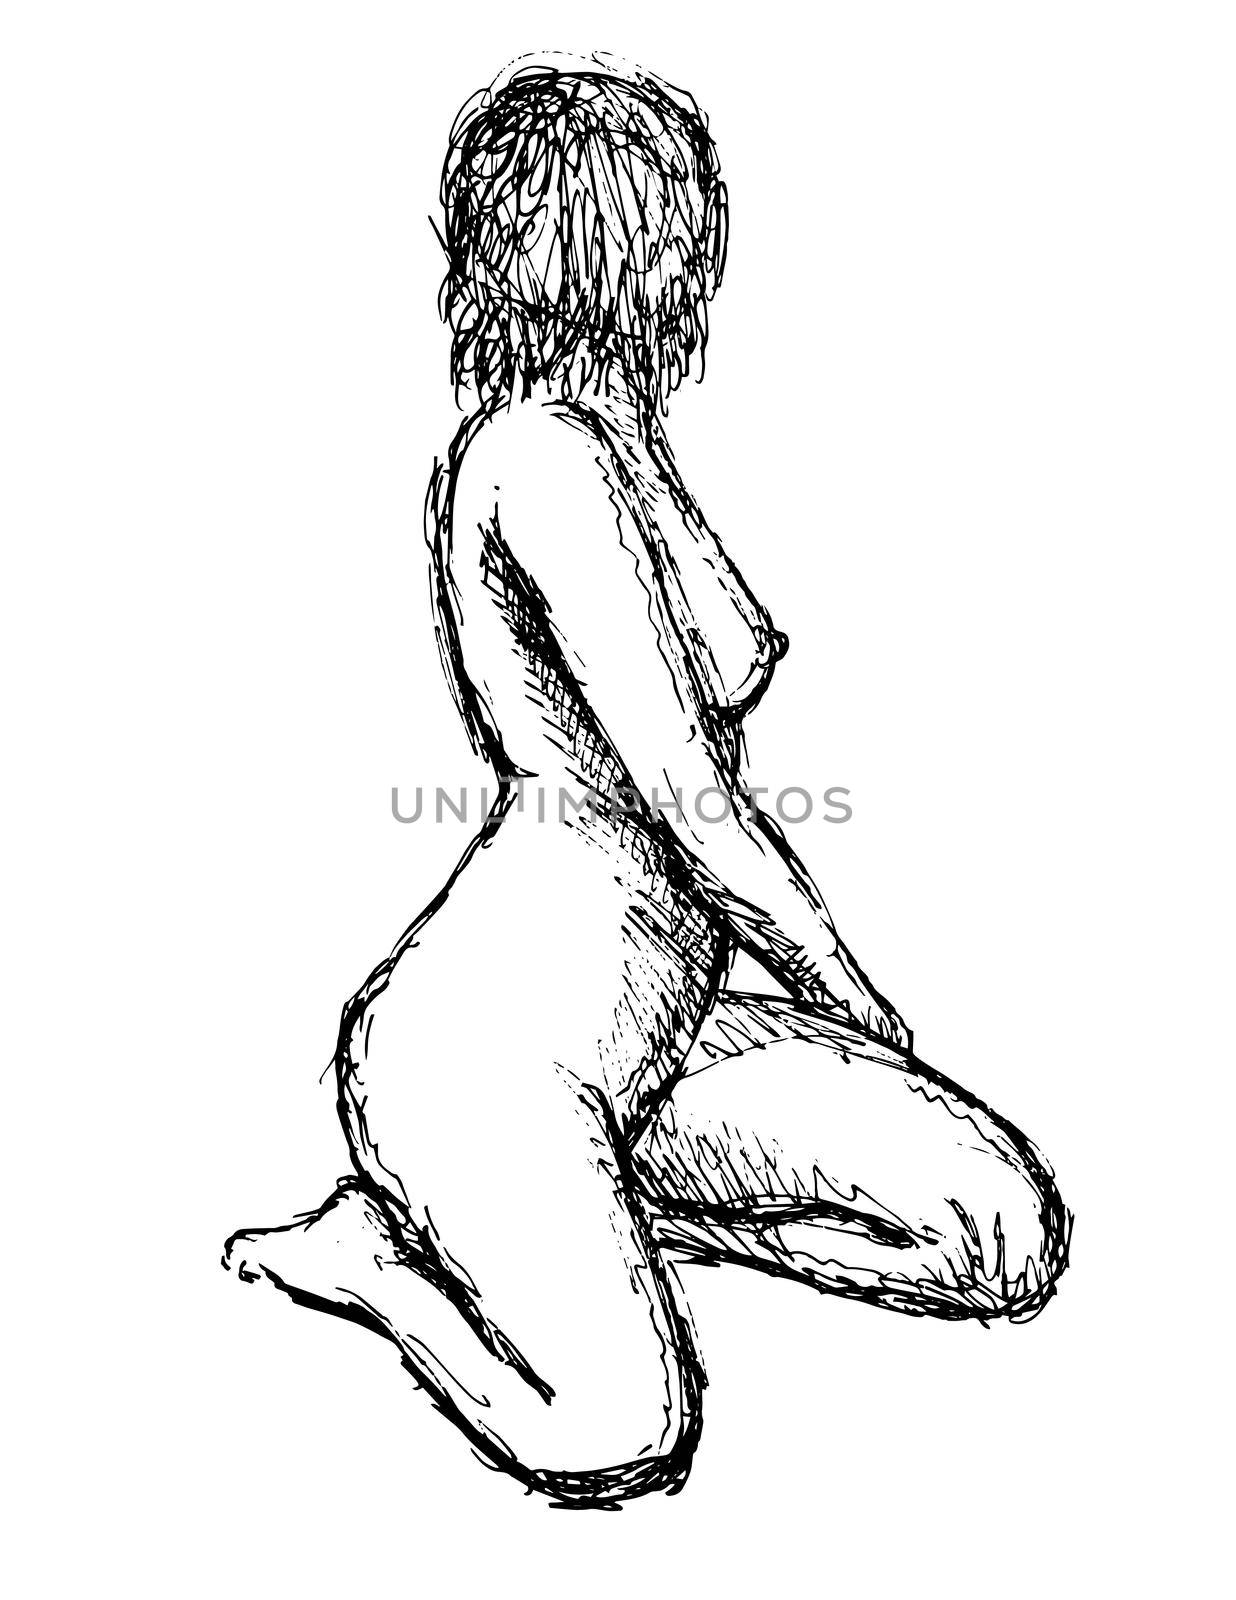 Doodle art illustration of a nude female human figure posing or sitting on knee done in continuous line drawing style in black and white on isolated background.